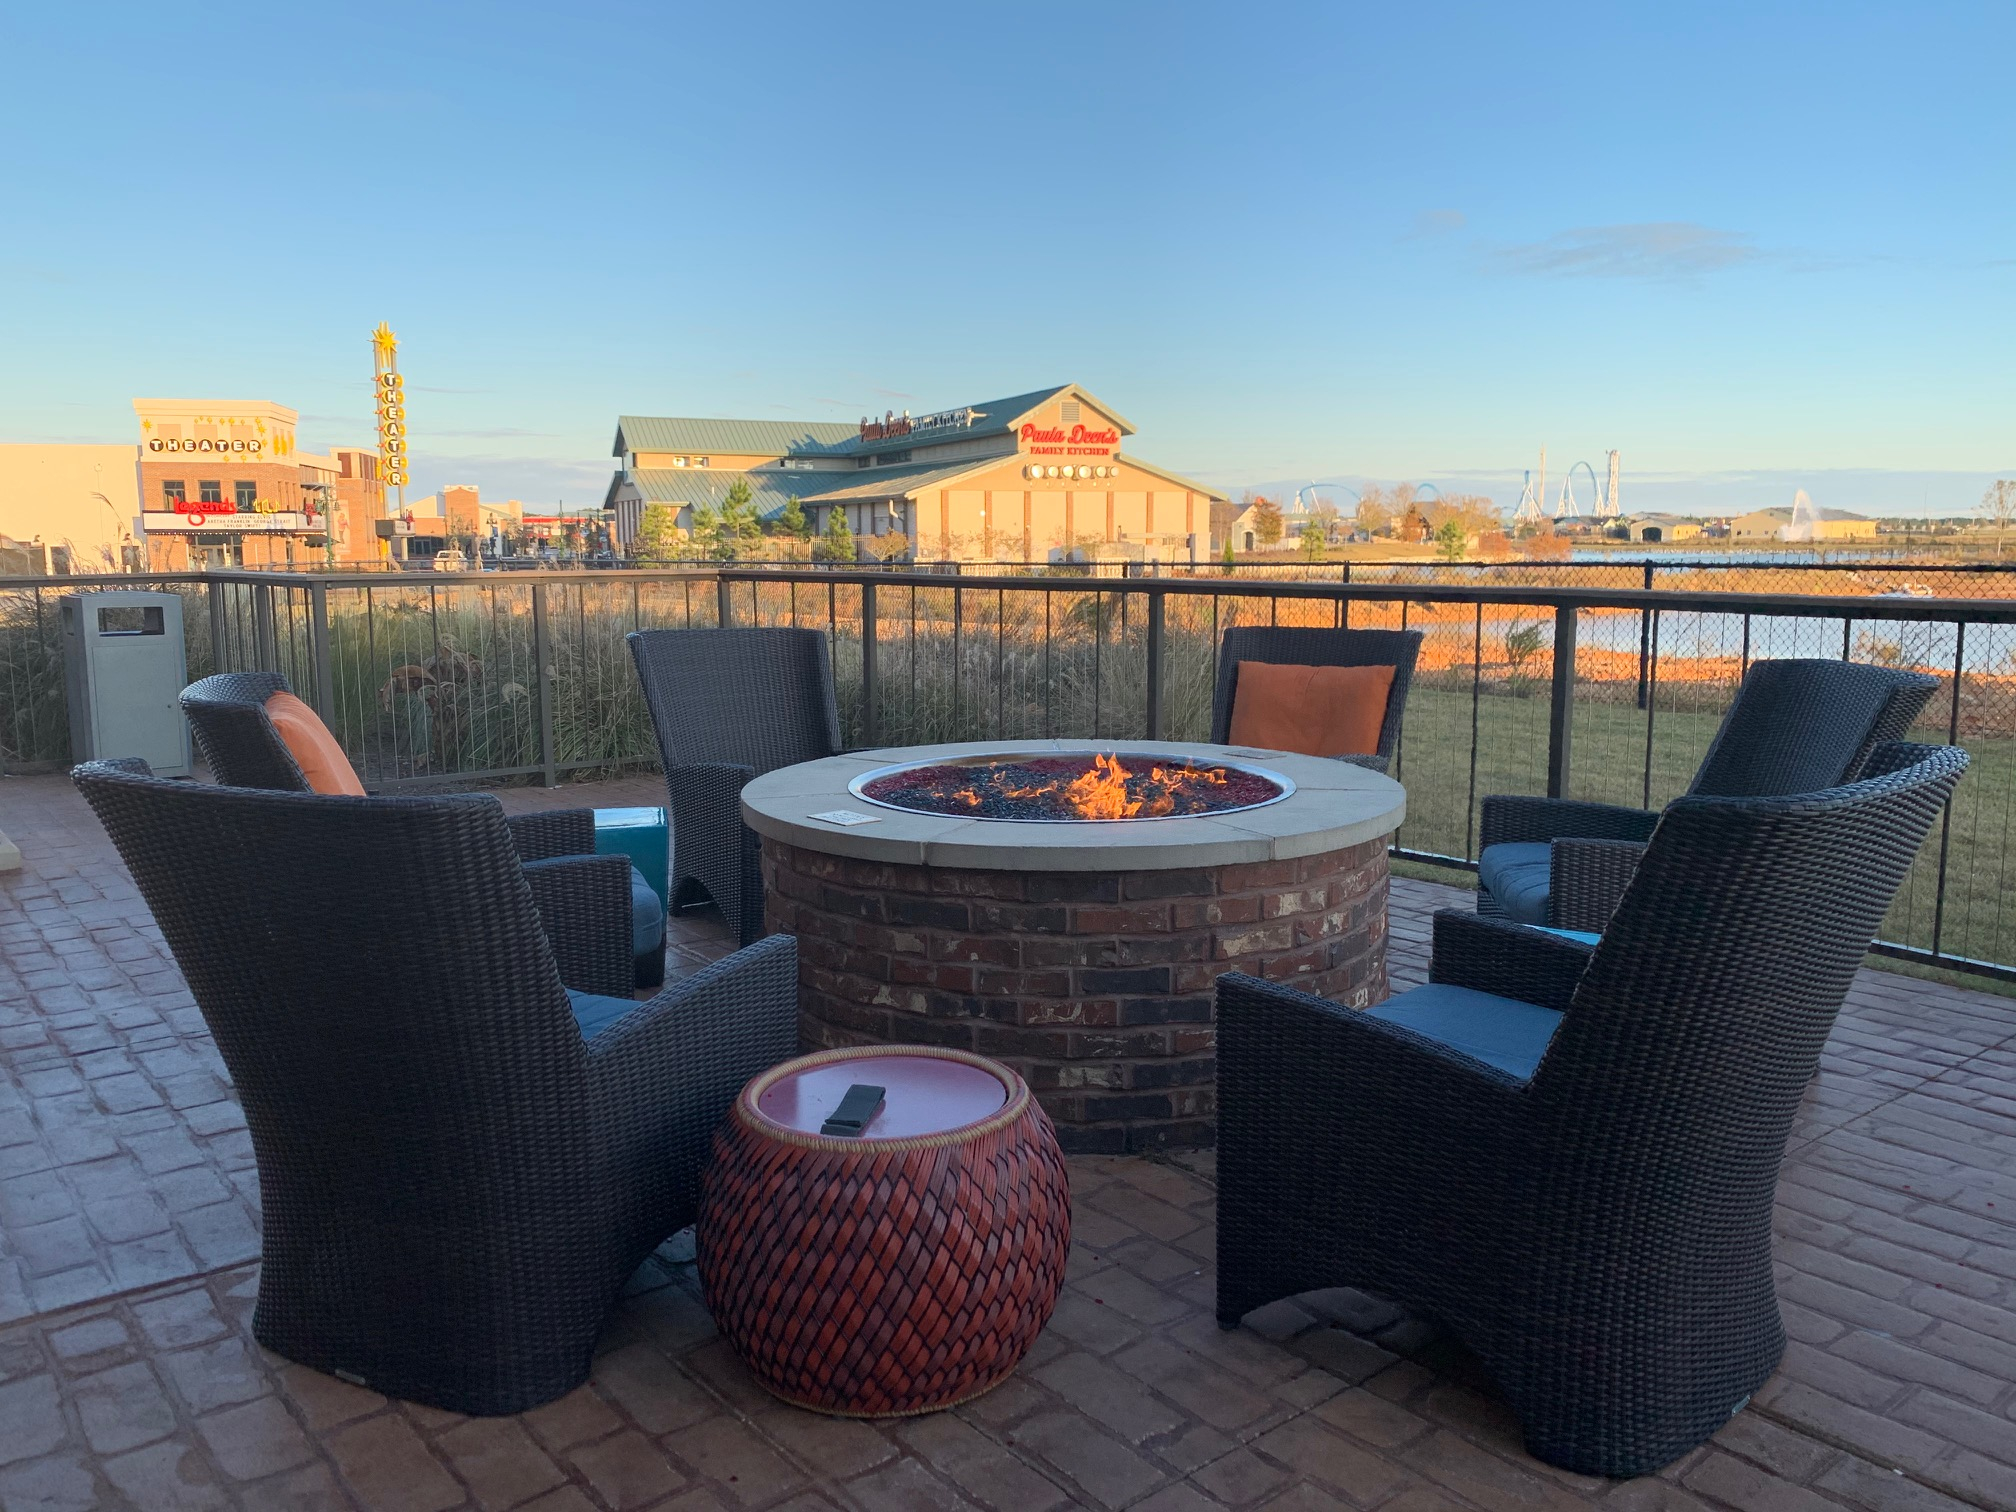 The Park at OWA Marriott TownPlace Suites at OWA patio with fire pit